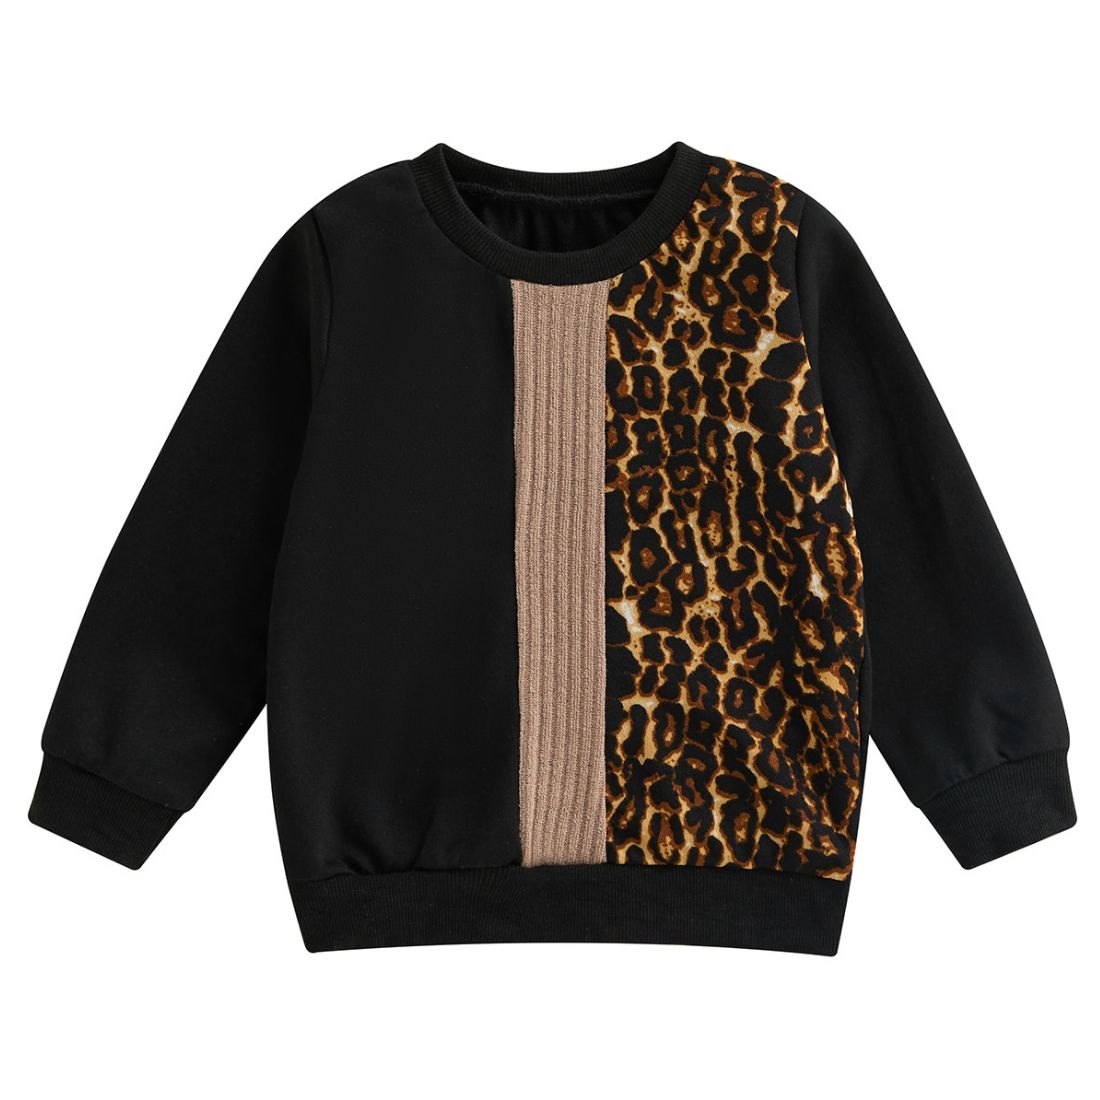 Little Girl Black Leopard Sweatshirt - My Trendy Youngsters | Buy on-trend and stylish Baby and Toddler Winter apparel @ My Trendy Youngsters - Dress your little one in Style @ My Trendy Youngsters 